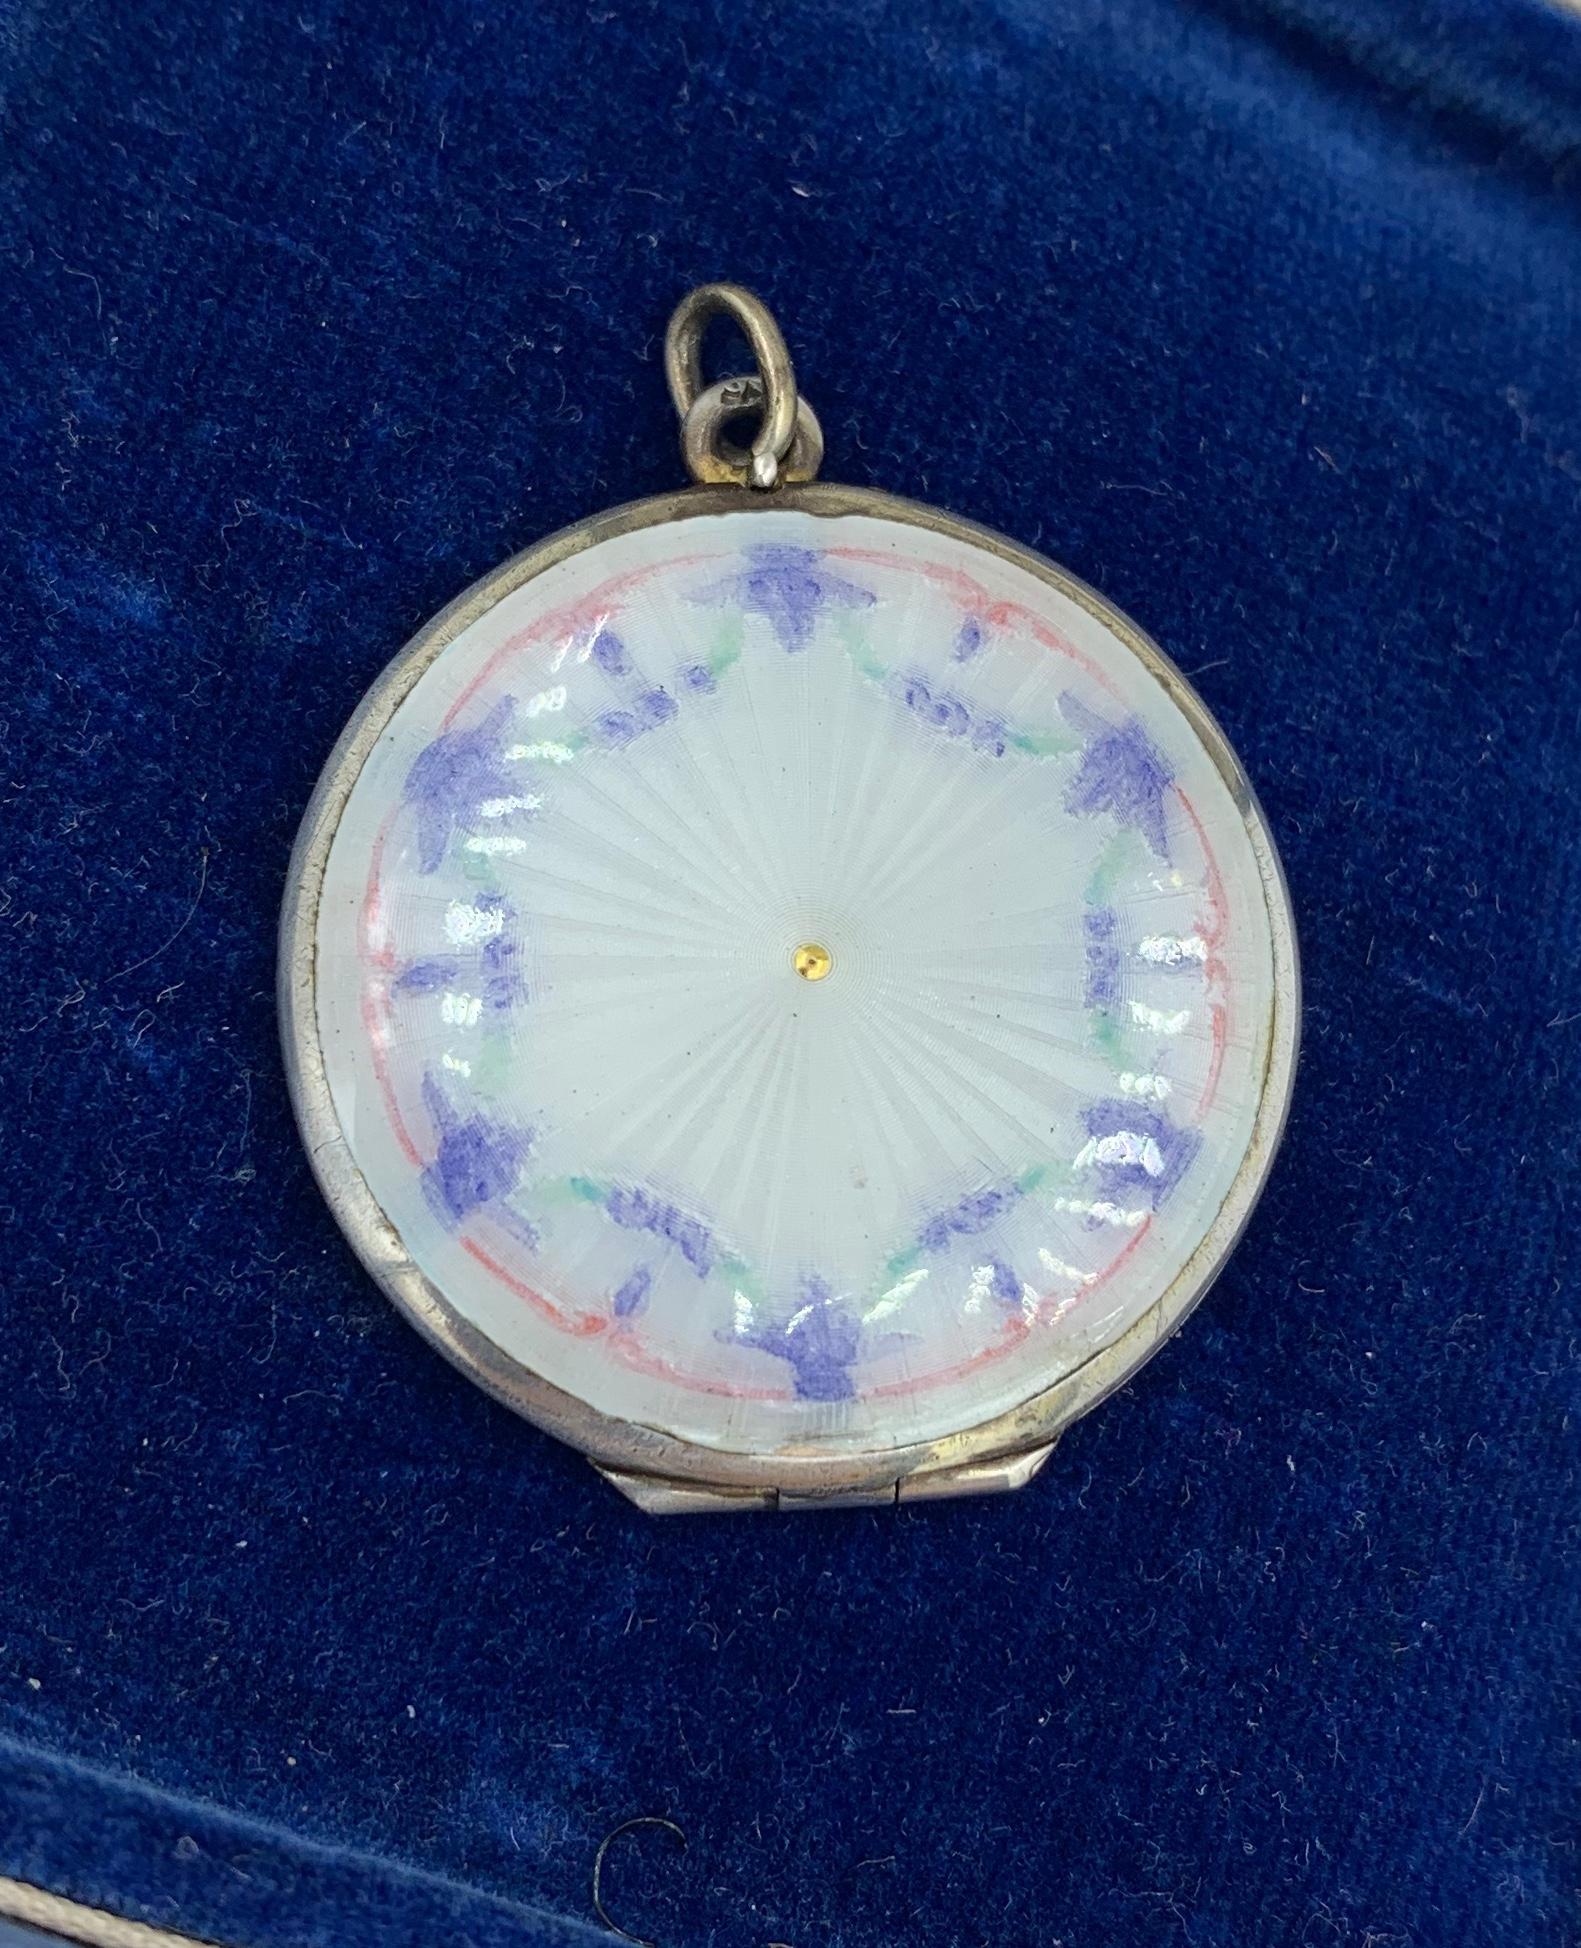 This is a wonderful Edwardian - Art Deco Locket Pendant with a gorgeous blue and pink enamel flower garland motif on a delicate pale blue-green Guilloche Enamel background over Sterling Silver.  The reverse of the locket has a guilloche engine